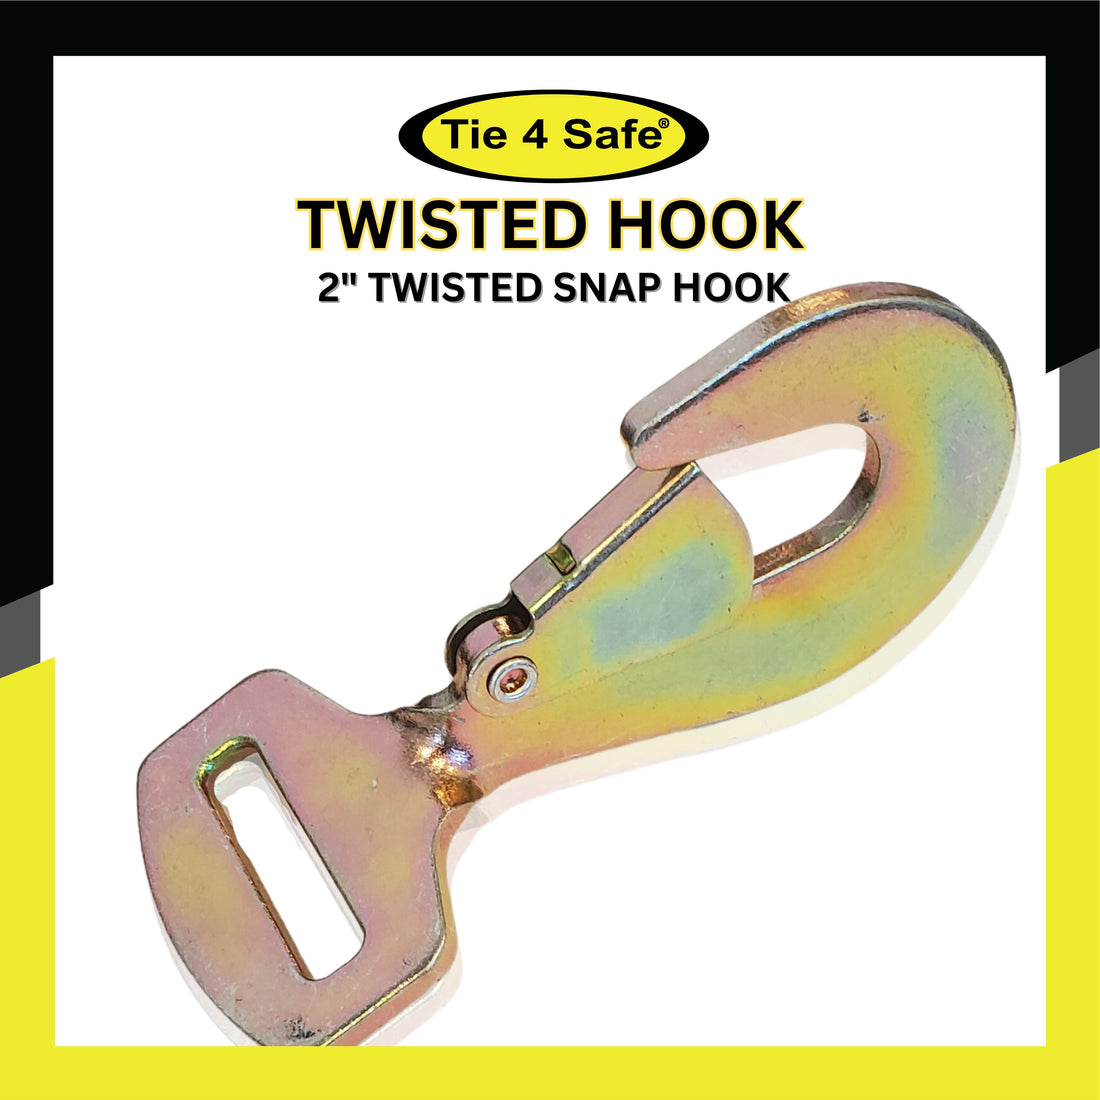 2" Twisted Snap Hook